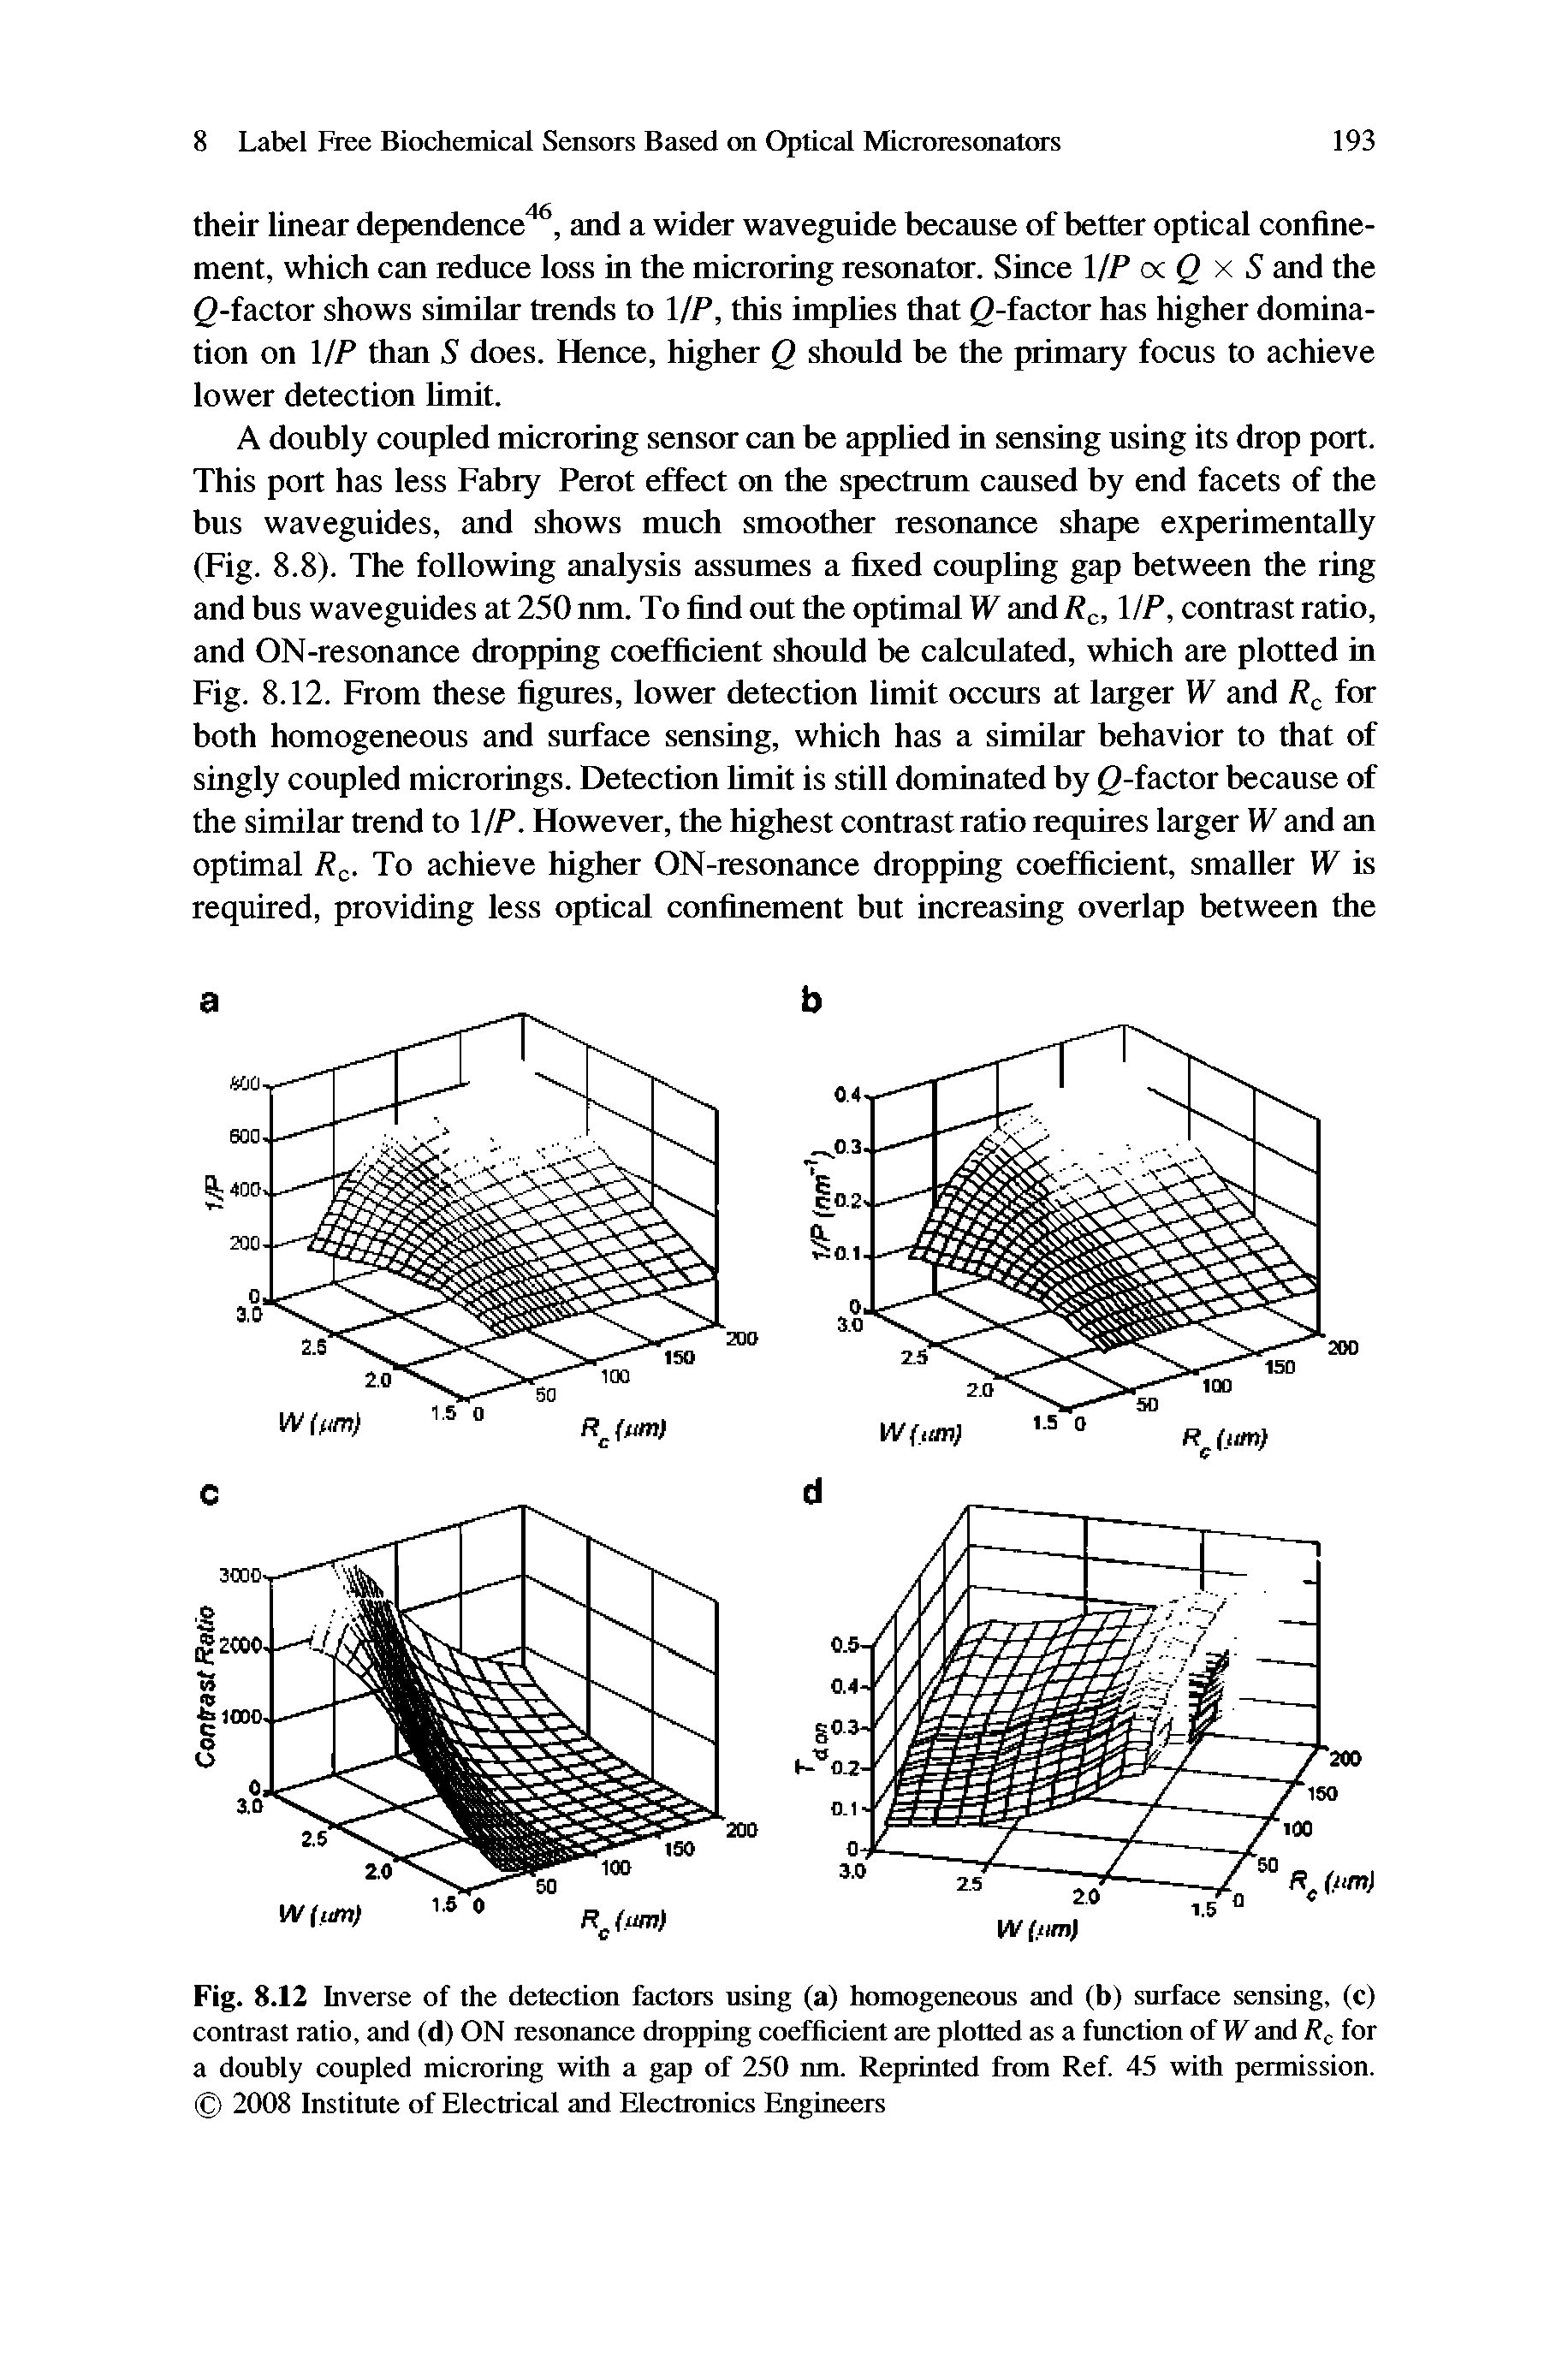 Fig. 8.12 Inverse of the detection factors using (a) homogeneous and (b) surface sensing, (c) contrast ratio, and (d) ON resonance dropping coefficient are plotted as a function of IF and Rc for a doubly coupled microring with a gap of 250 nm. Reprinted from Ref. 45 with permission. 2008 Institute of Electrical and Electronics Engineers...